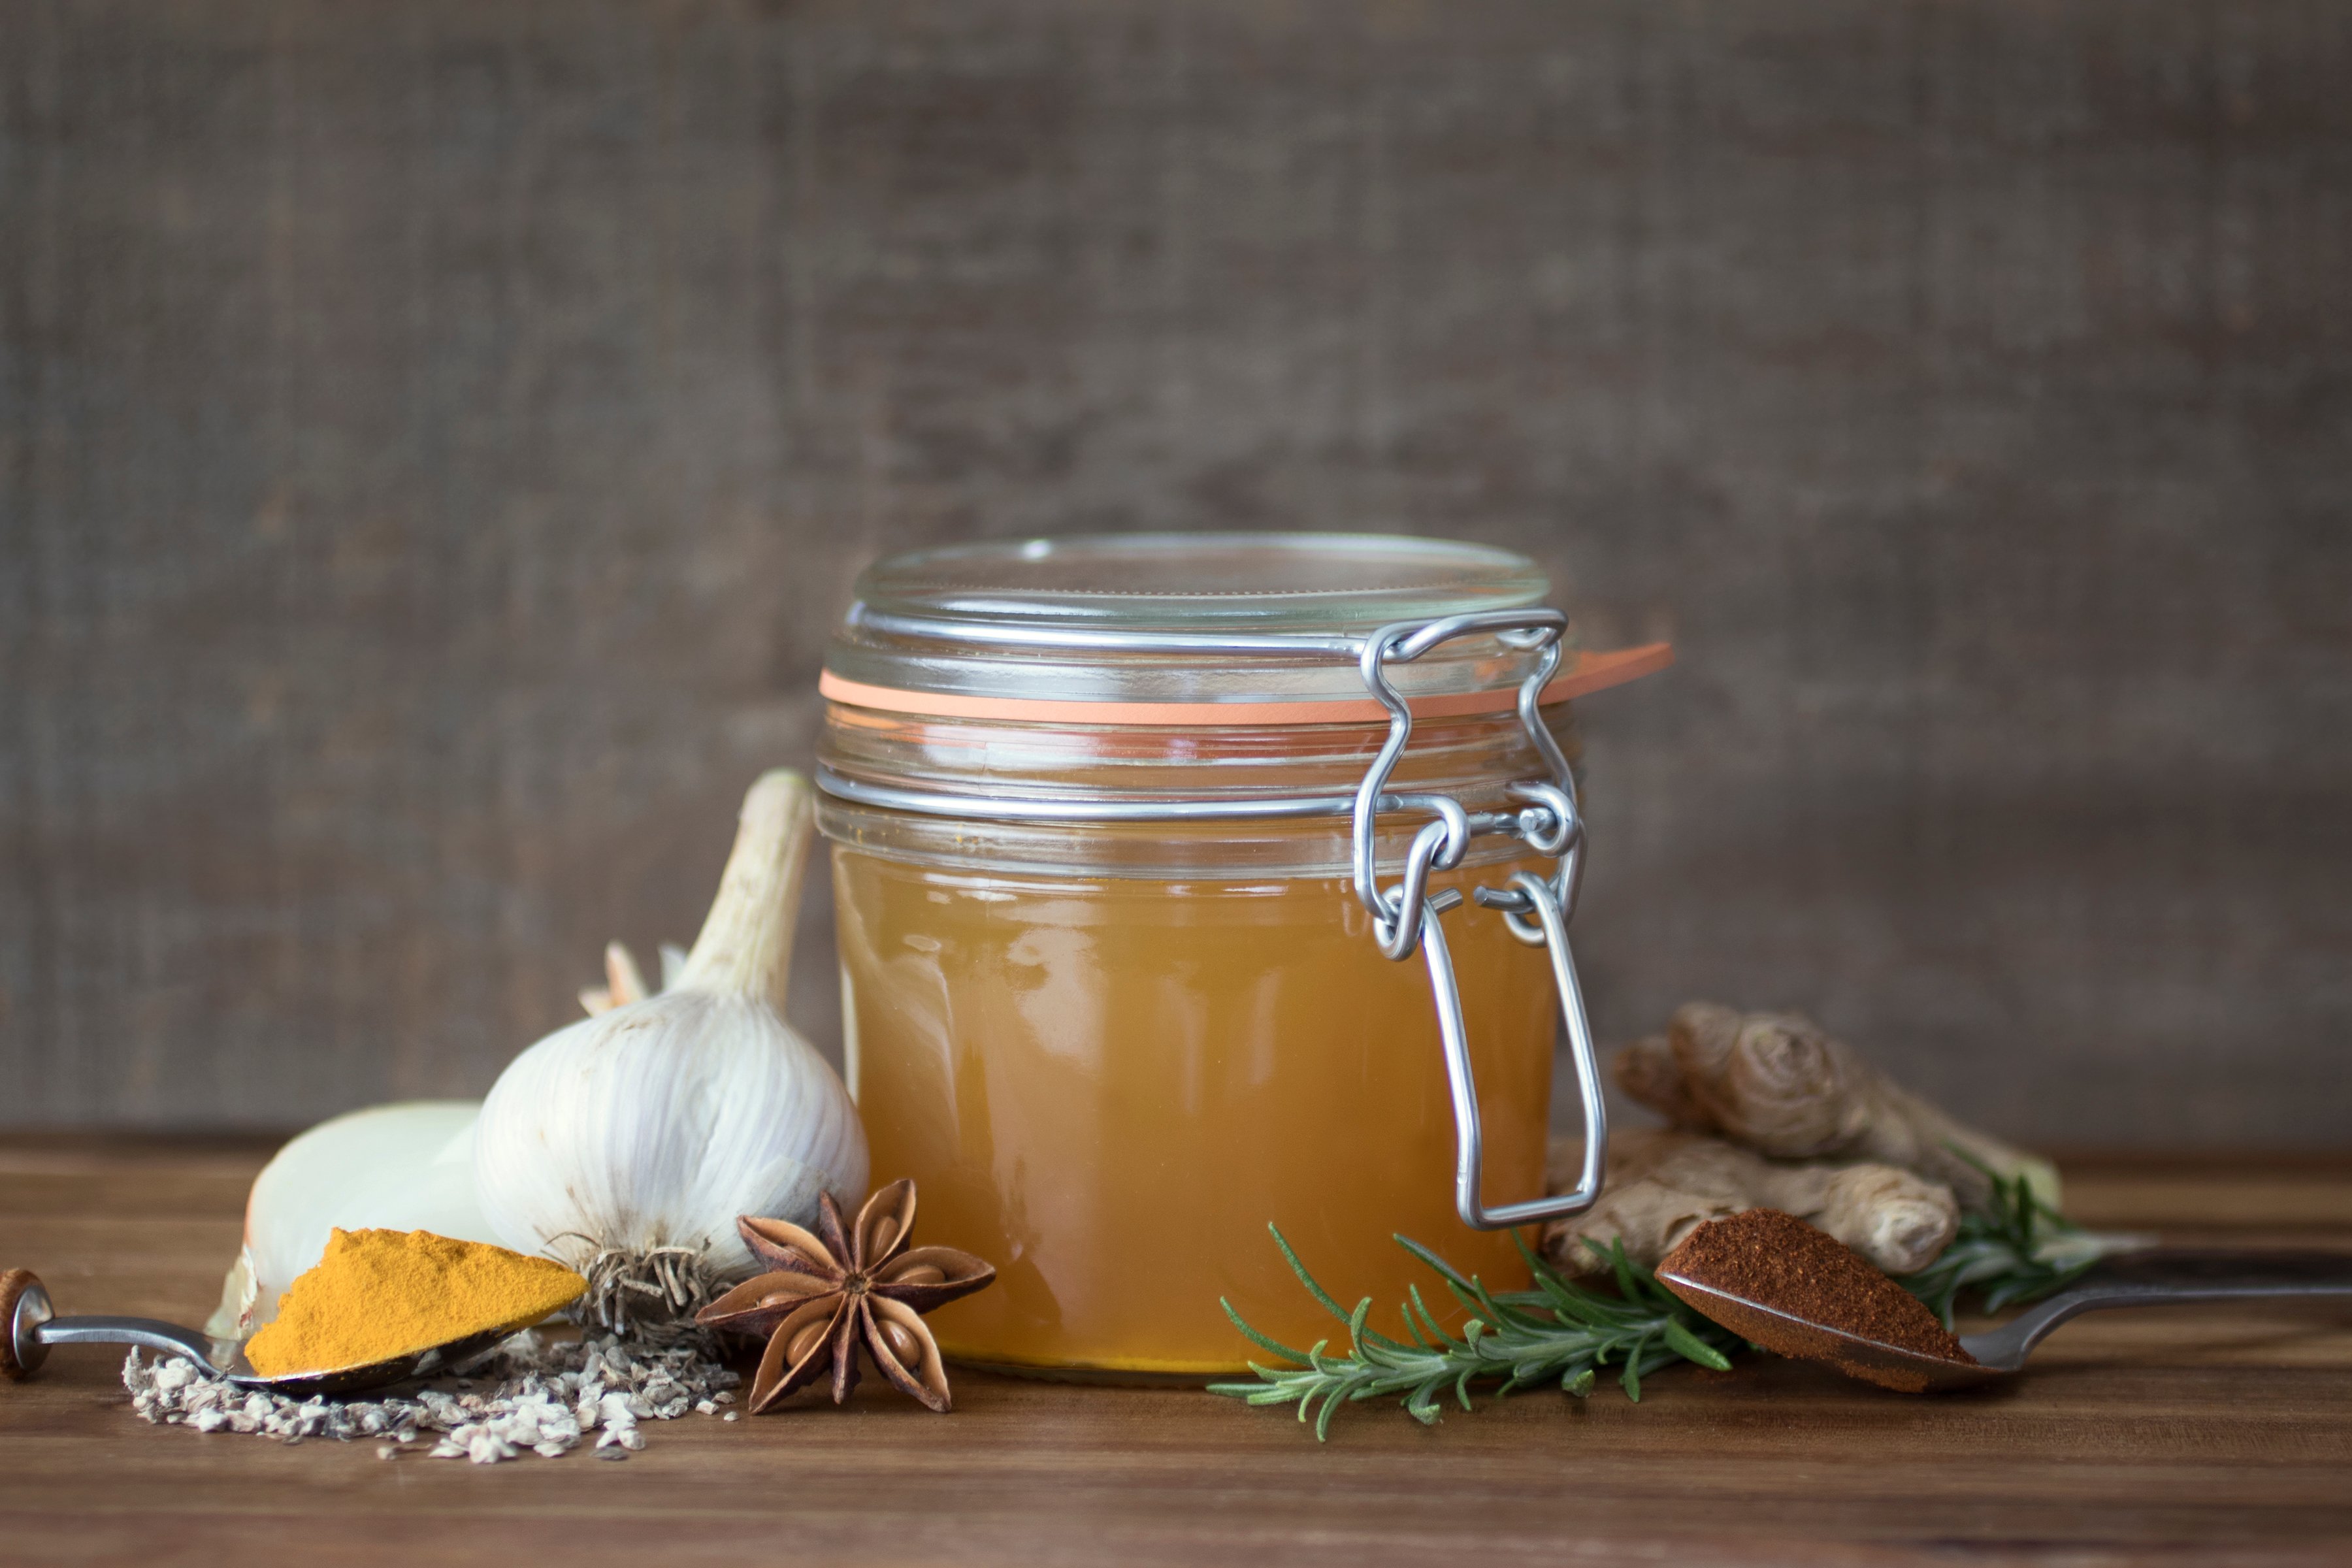 Homemade fire cider in a glass pantry jar is a deep yellow color and features organic herbs and spices like garlic, anise star pod, turmeric powder, rosemary, ginger root, and more. 